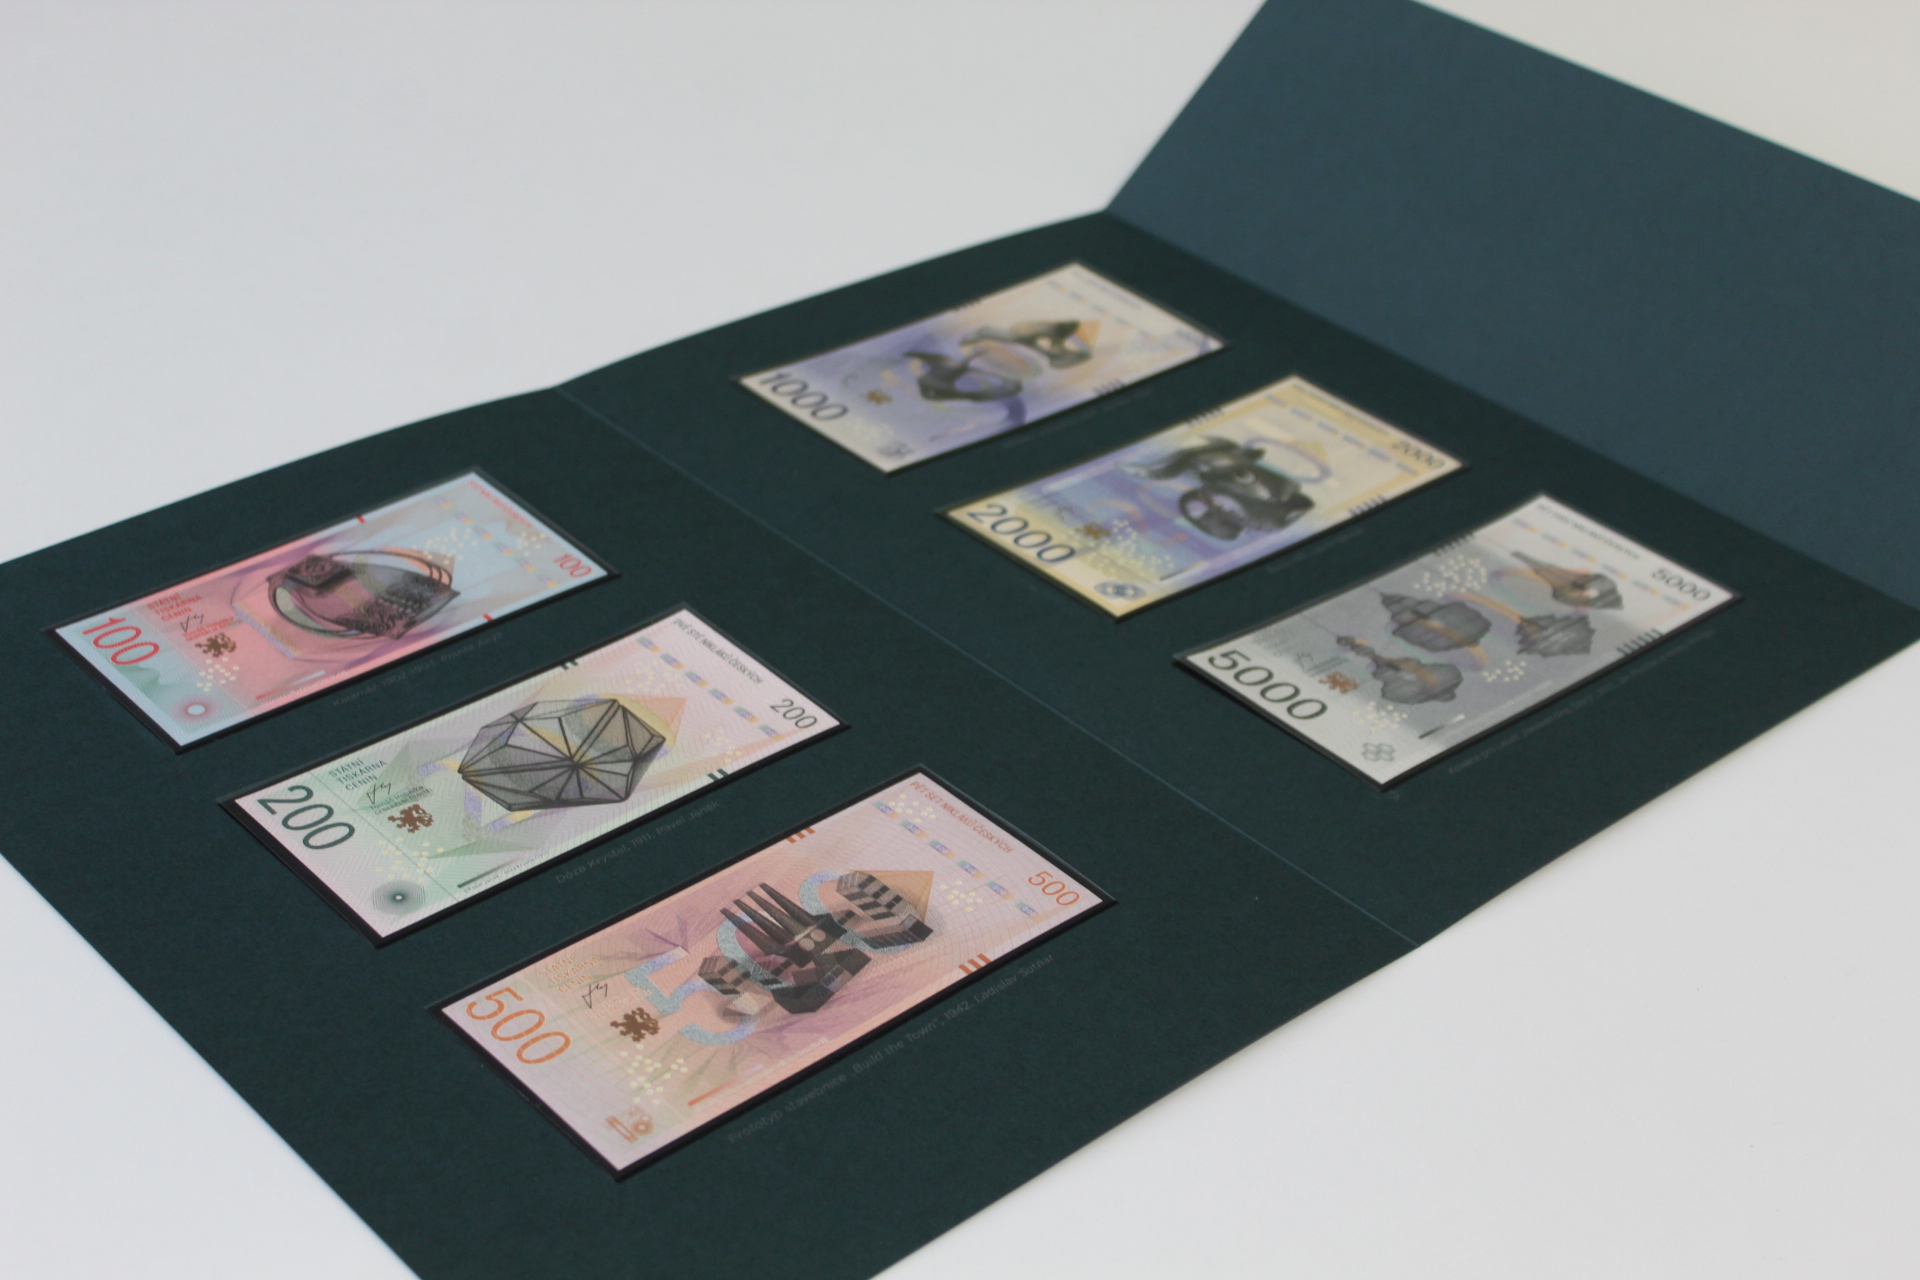 The collection of commemorative banknotes by Tuan Vuong Trong